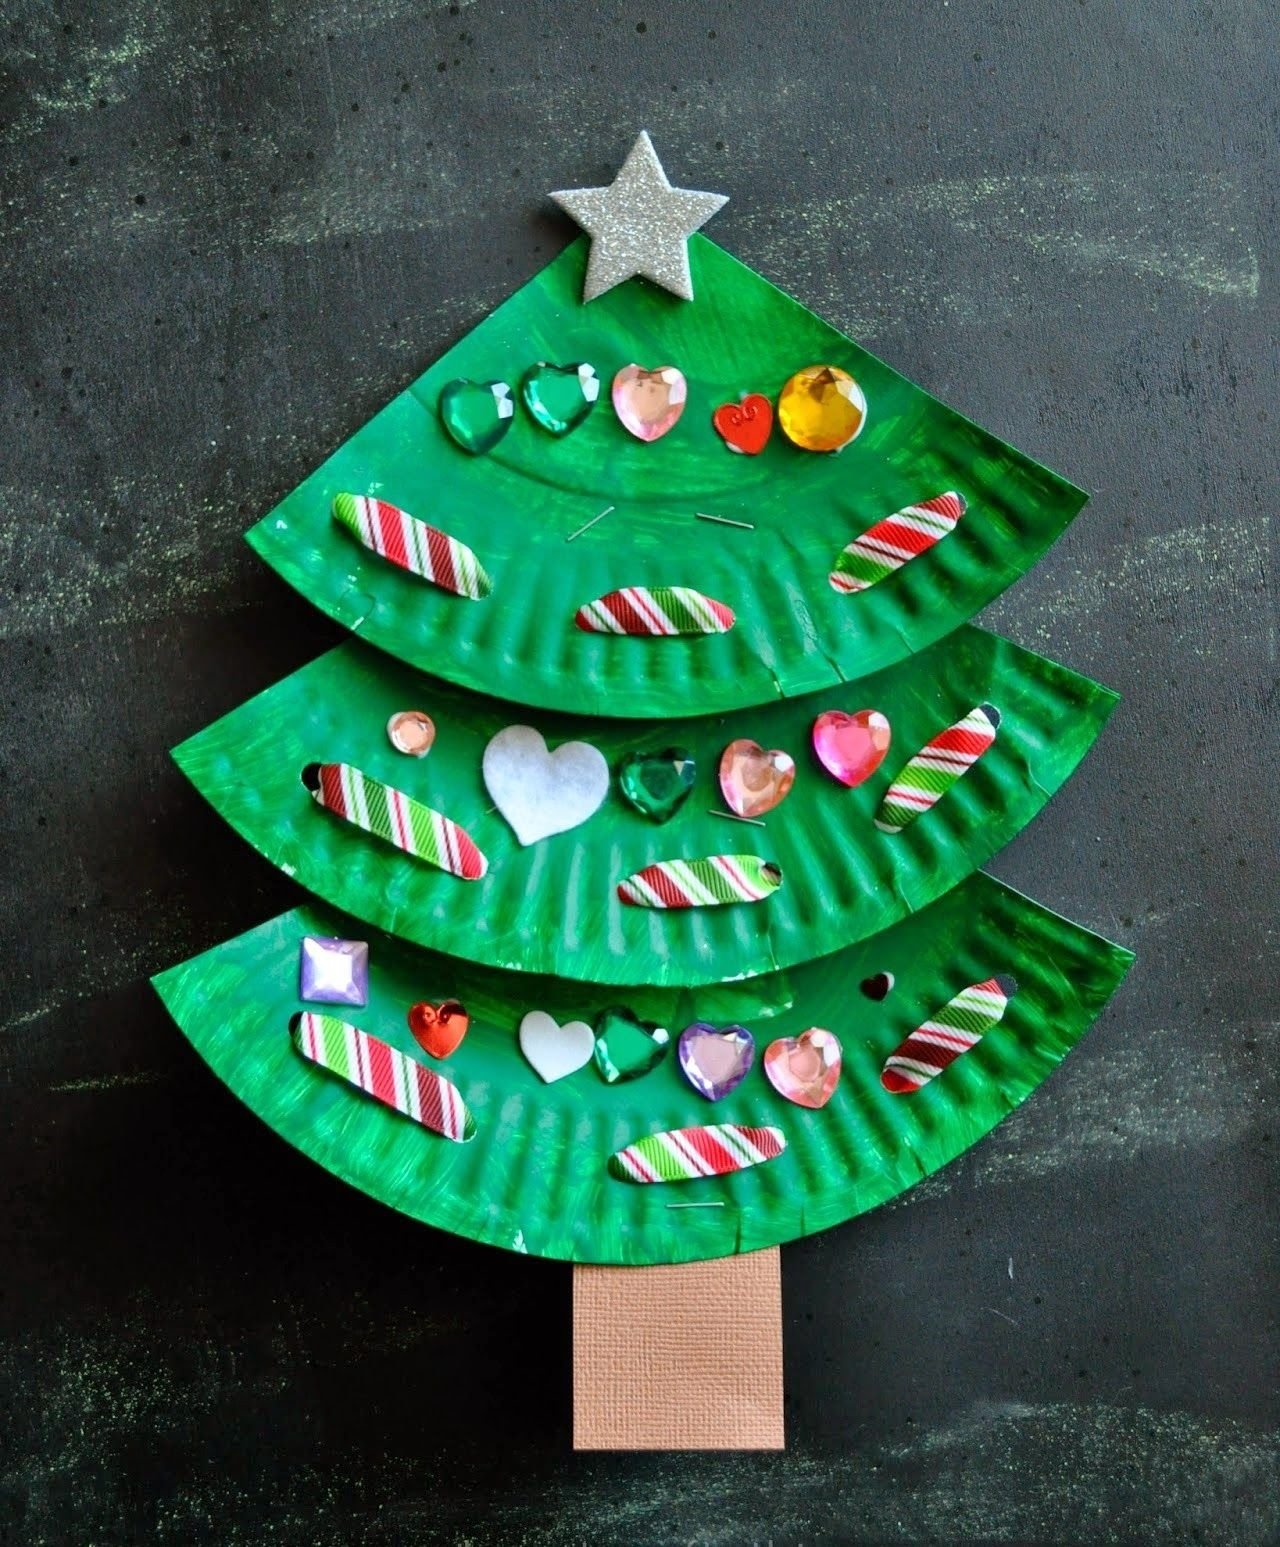 10 Pretty Christmas Arts And Craft Ideas image result for christmas plate gift idea craft pinterest 2 2022